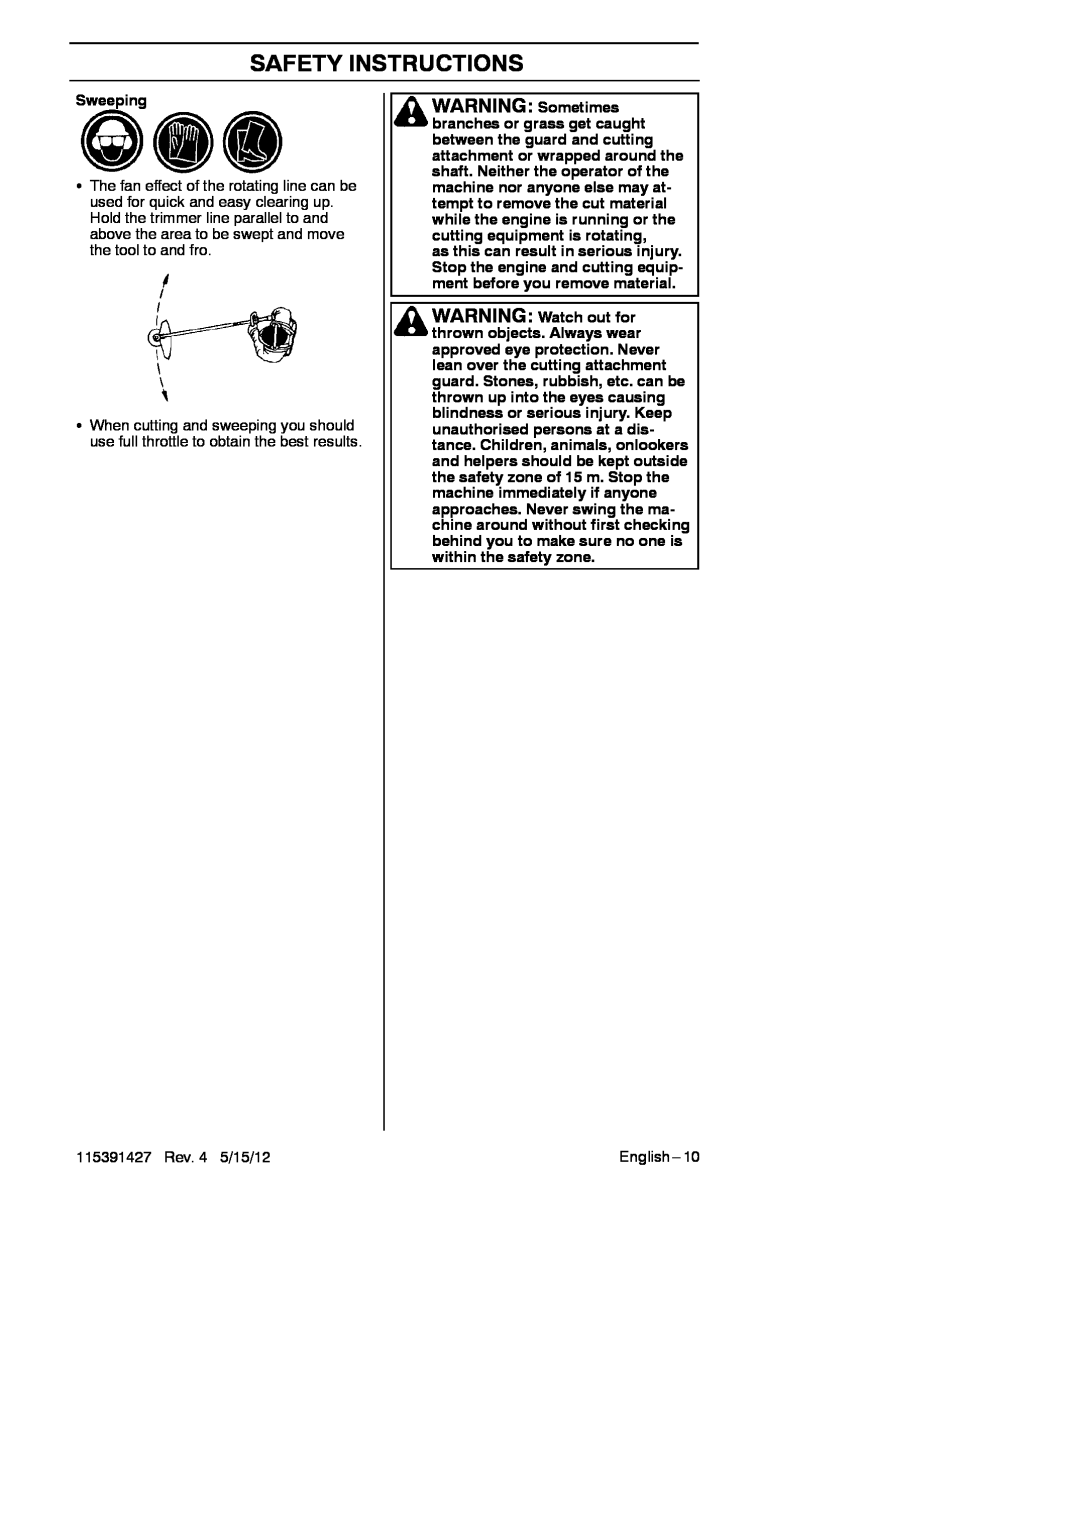 RedMax BT280 manual Safety Instructions, Sweeping, 115391427 Rev. 4 5/15/12, English---10 